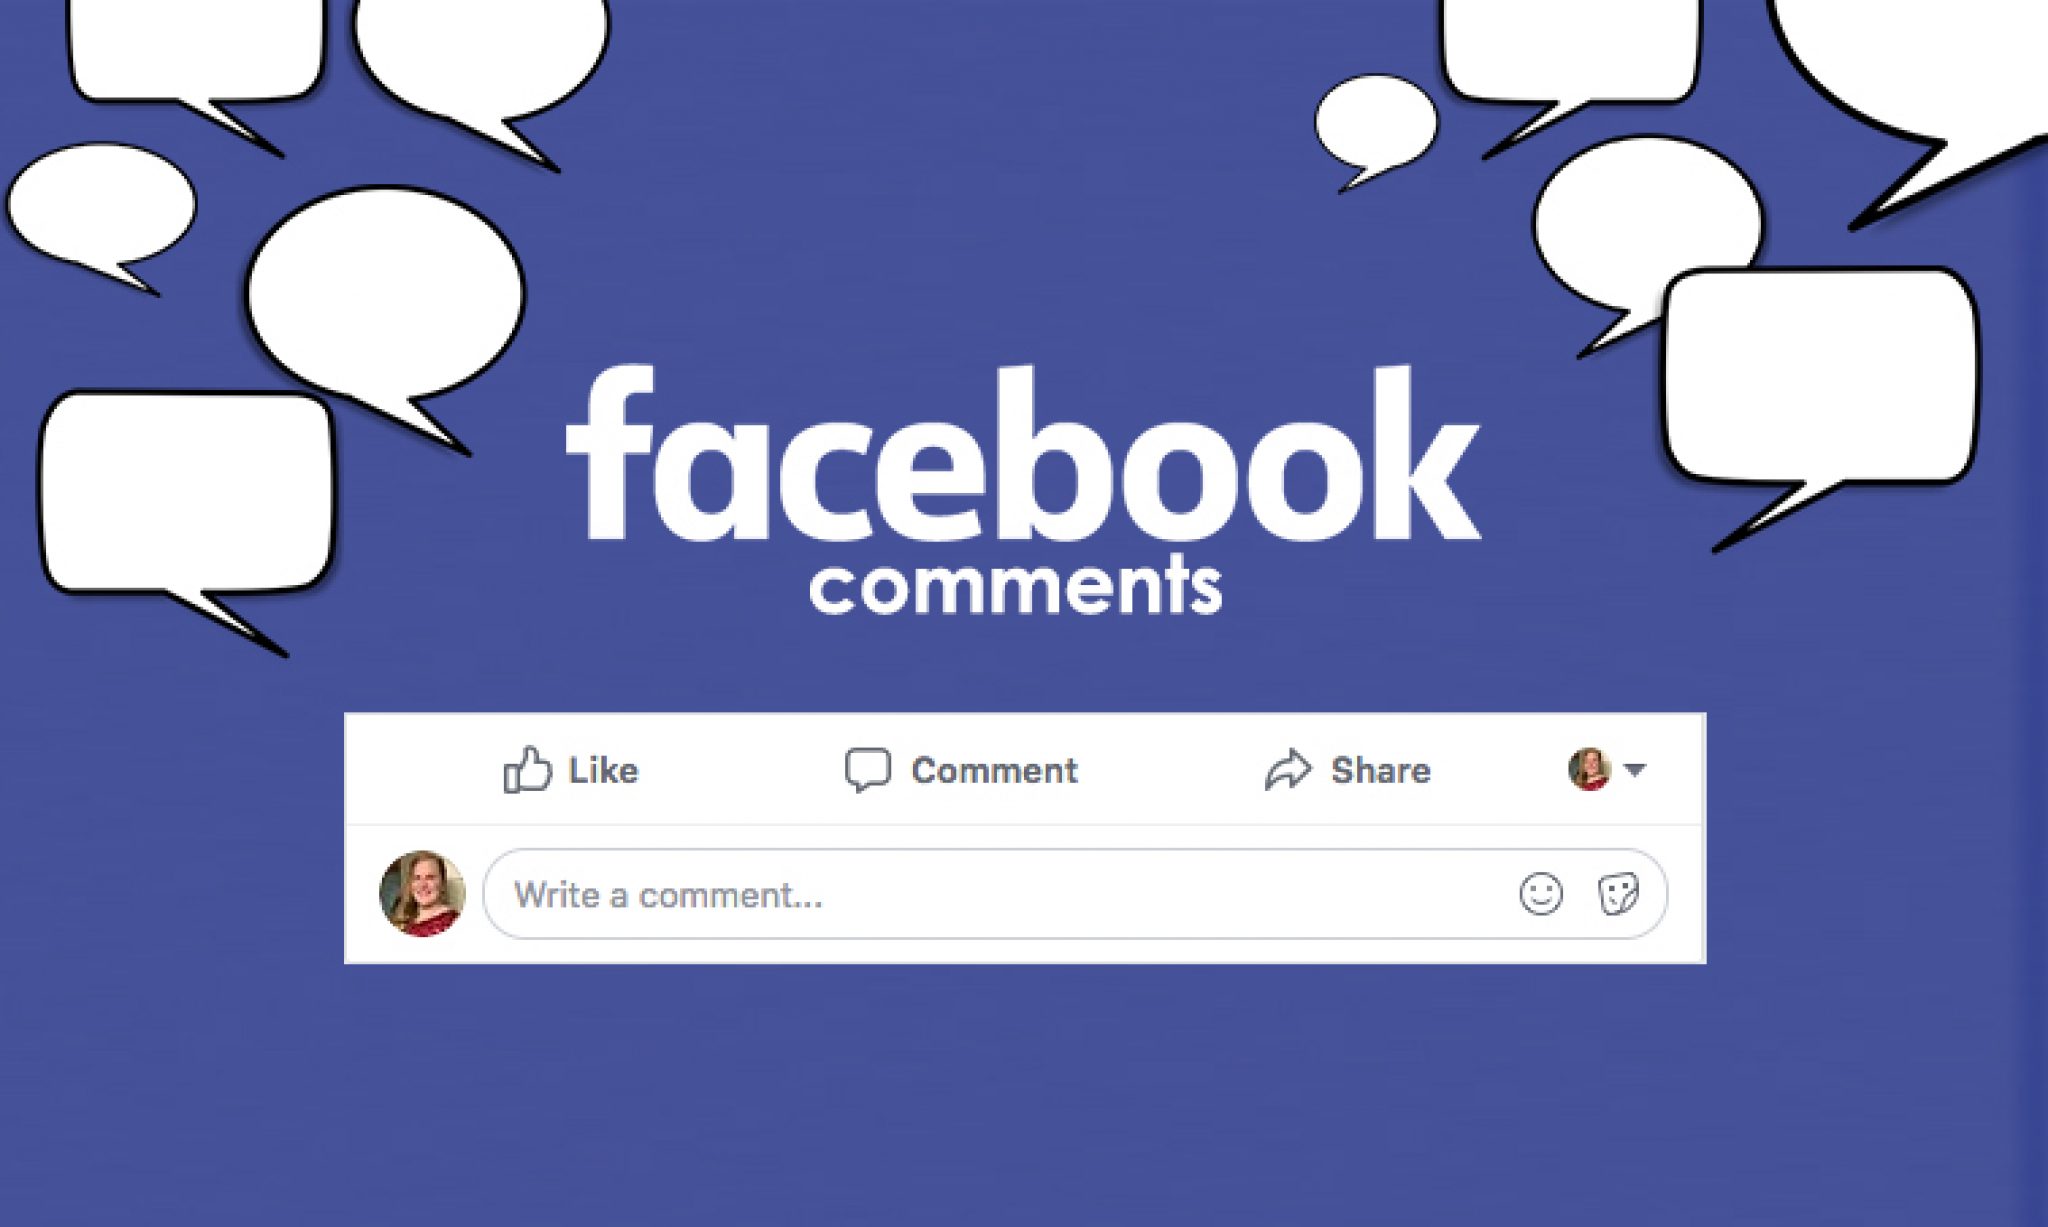 turn off facebook marketplace auto comments